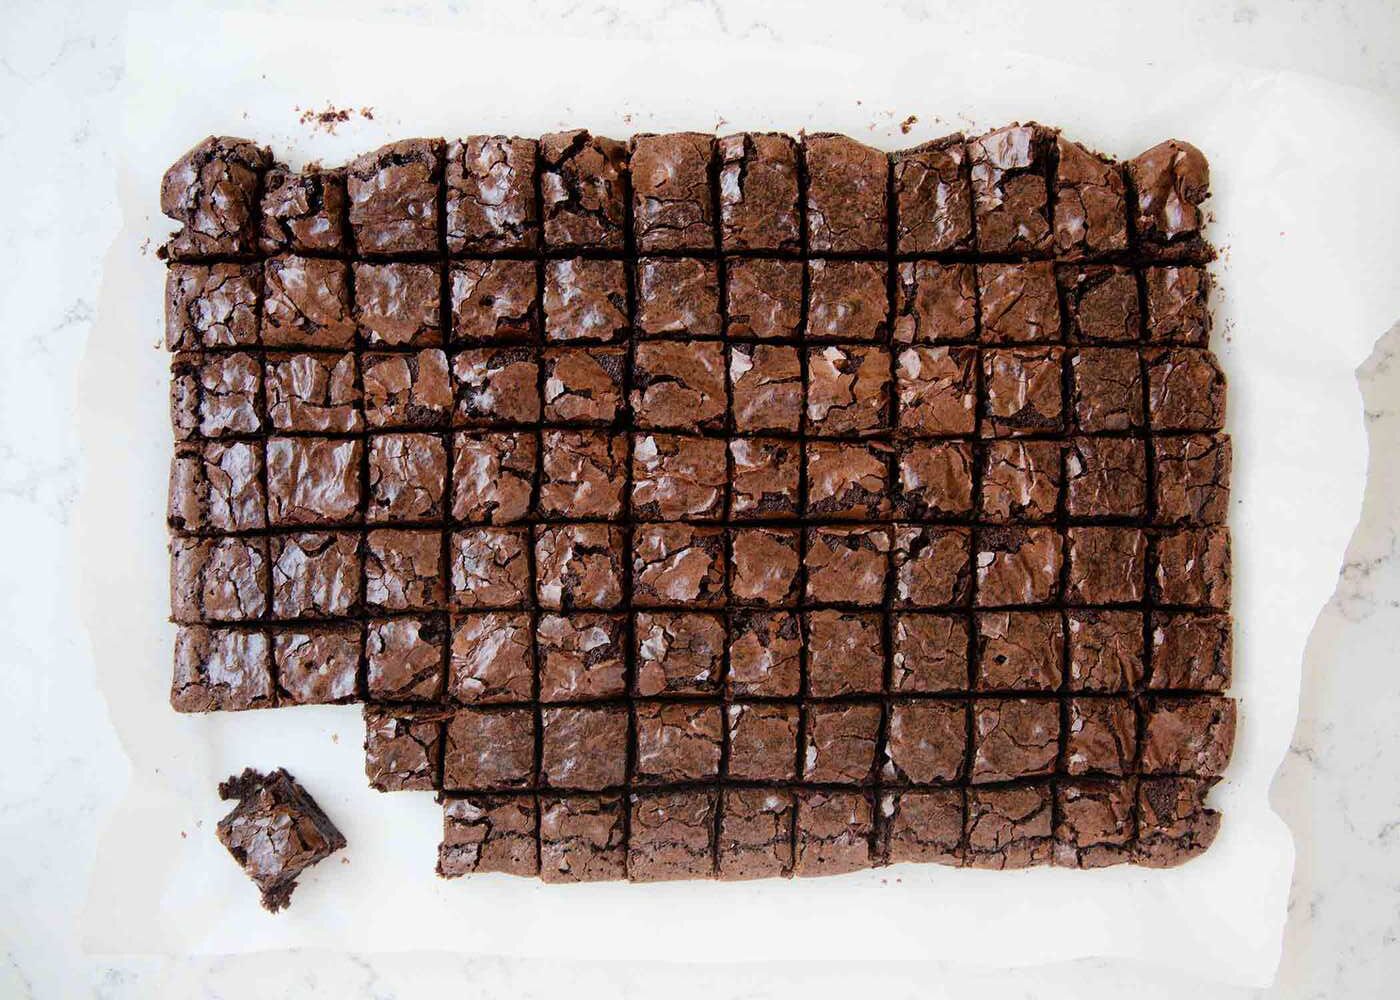 Baked brownies cut into 1 inch squares.